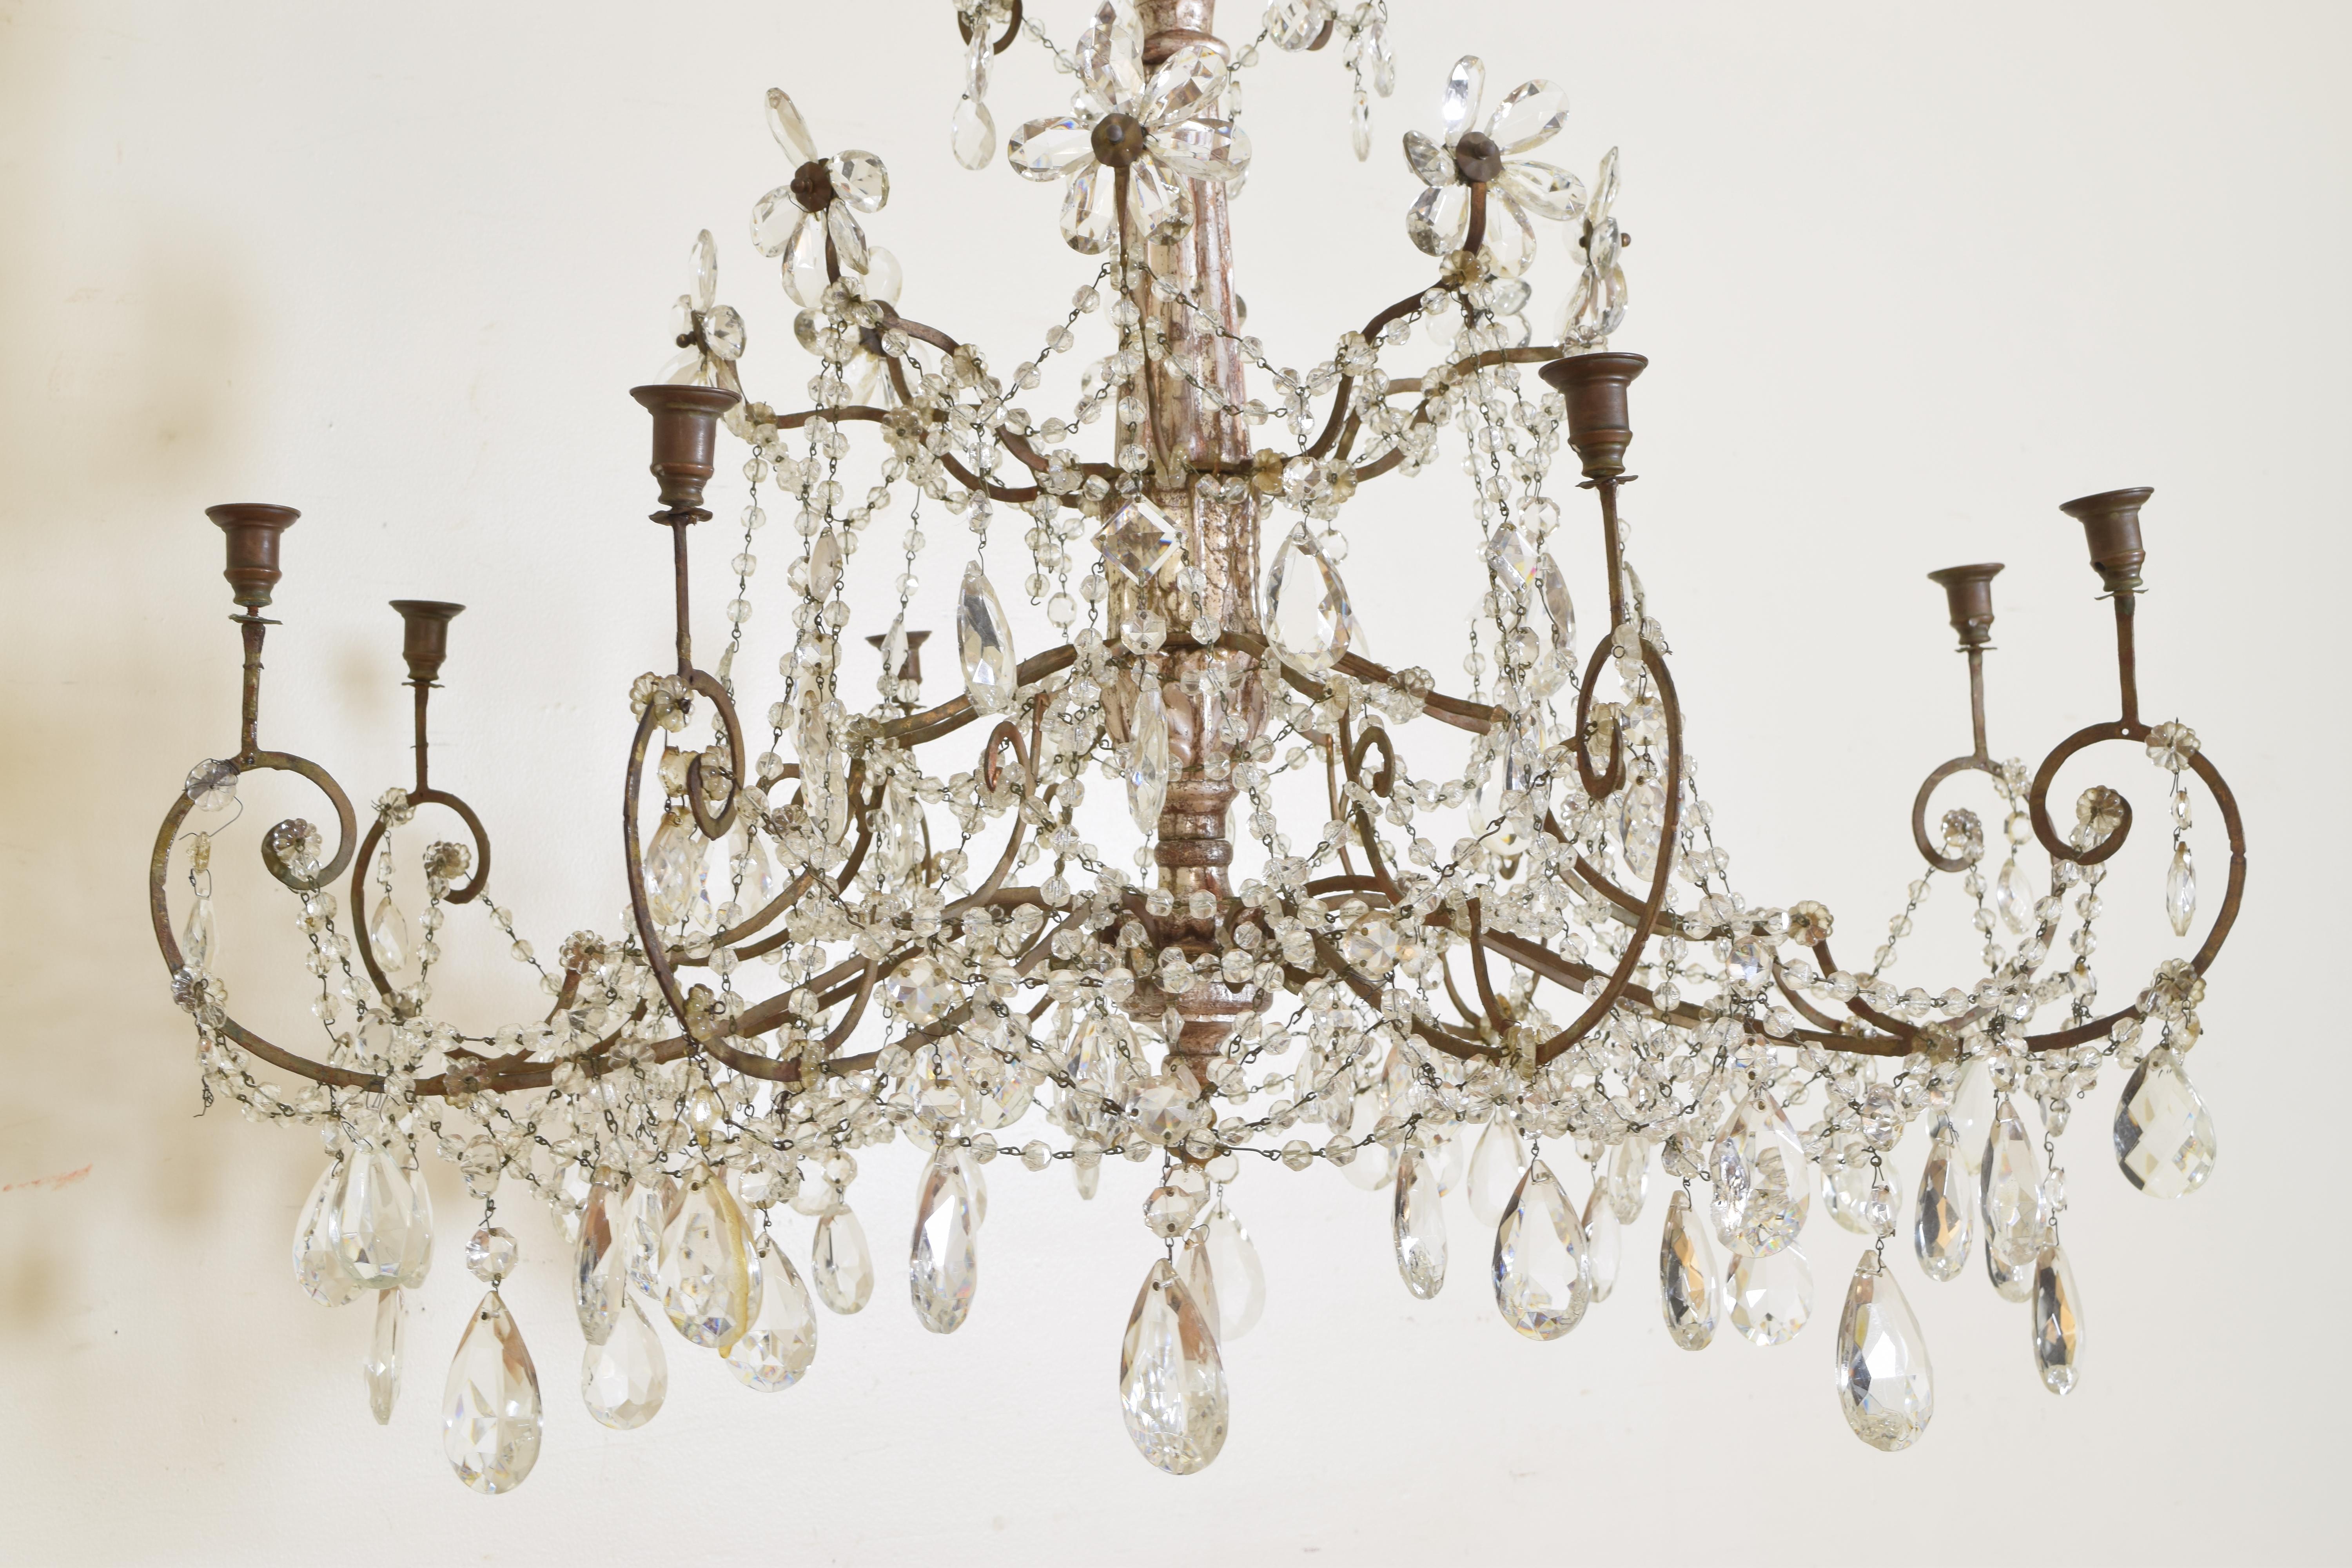 Mid-19th Century Italian Neoclassic Silver Gilt, Iron, and Glass 8-Light Chandelier